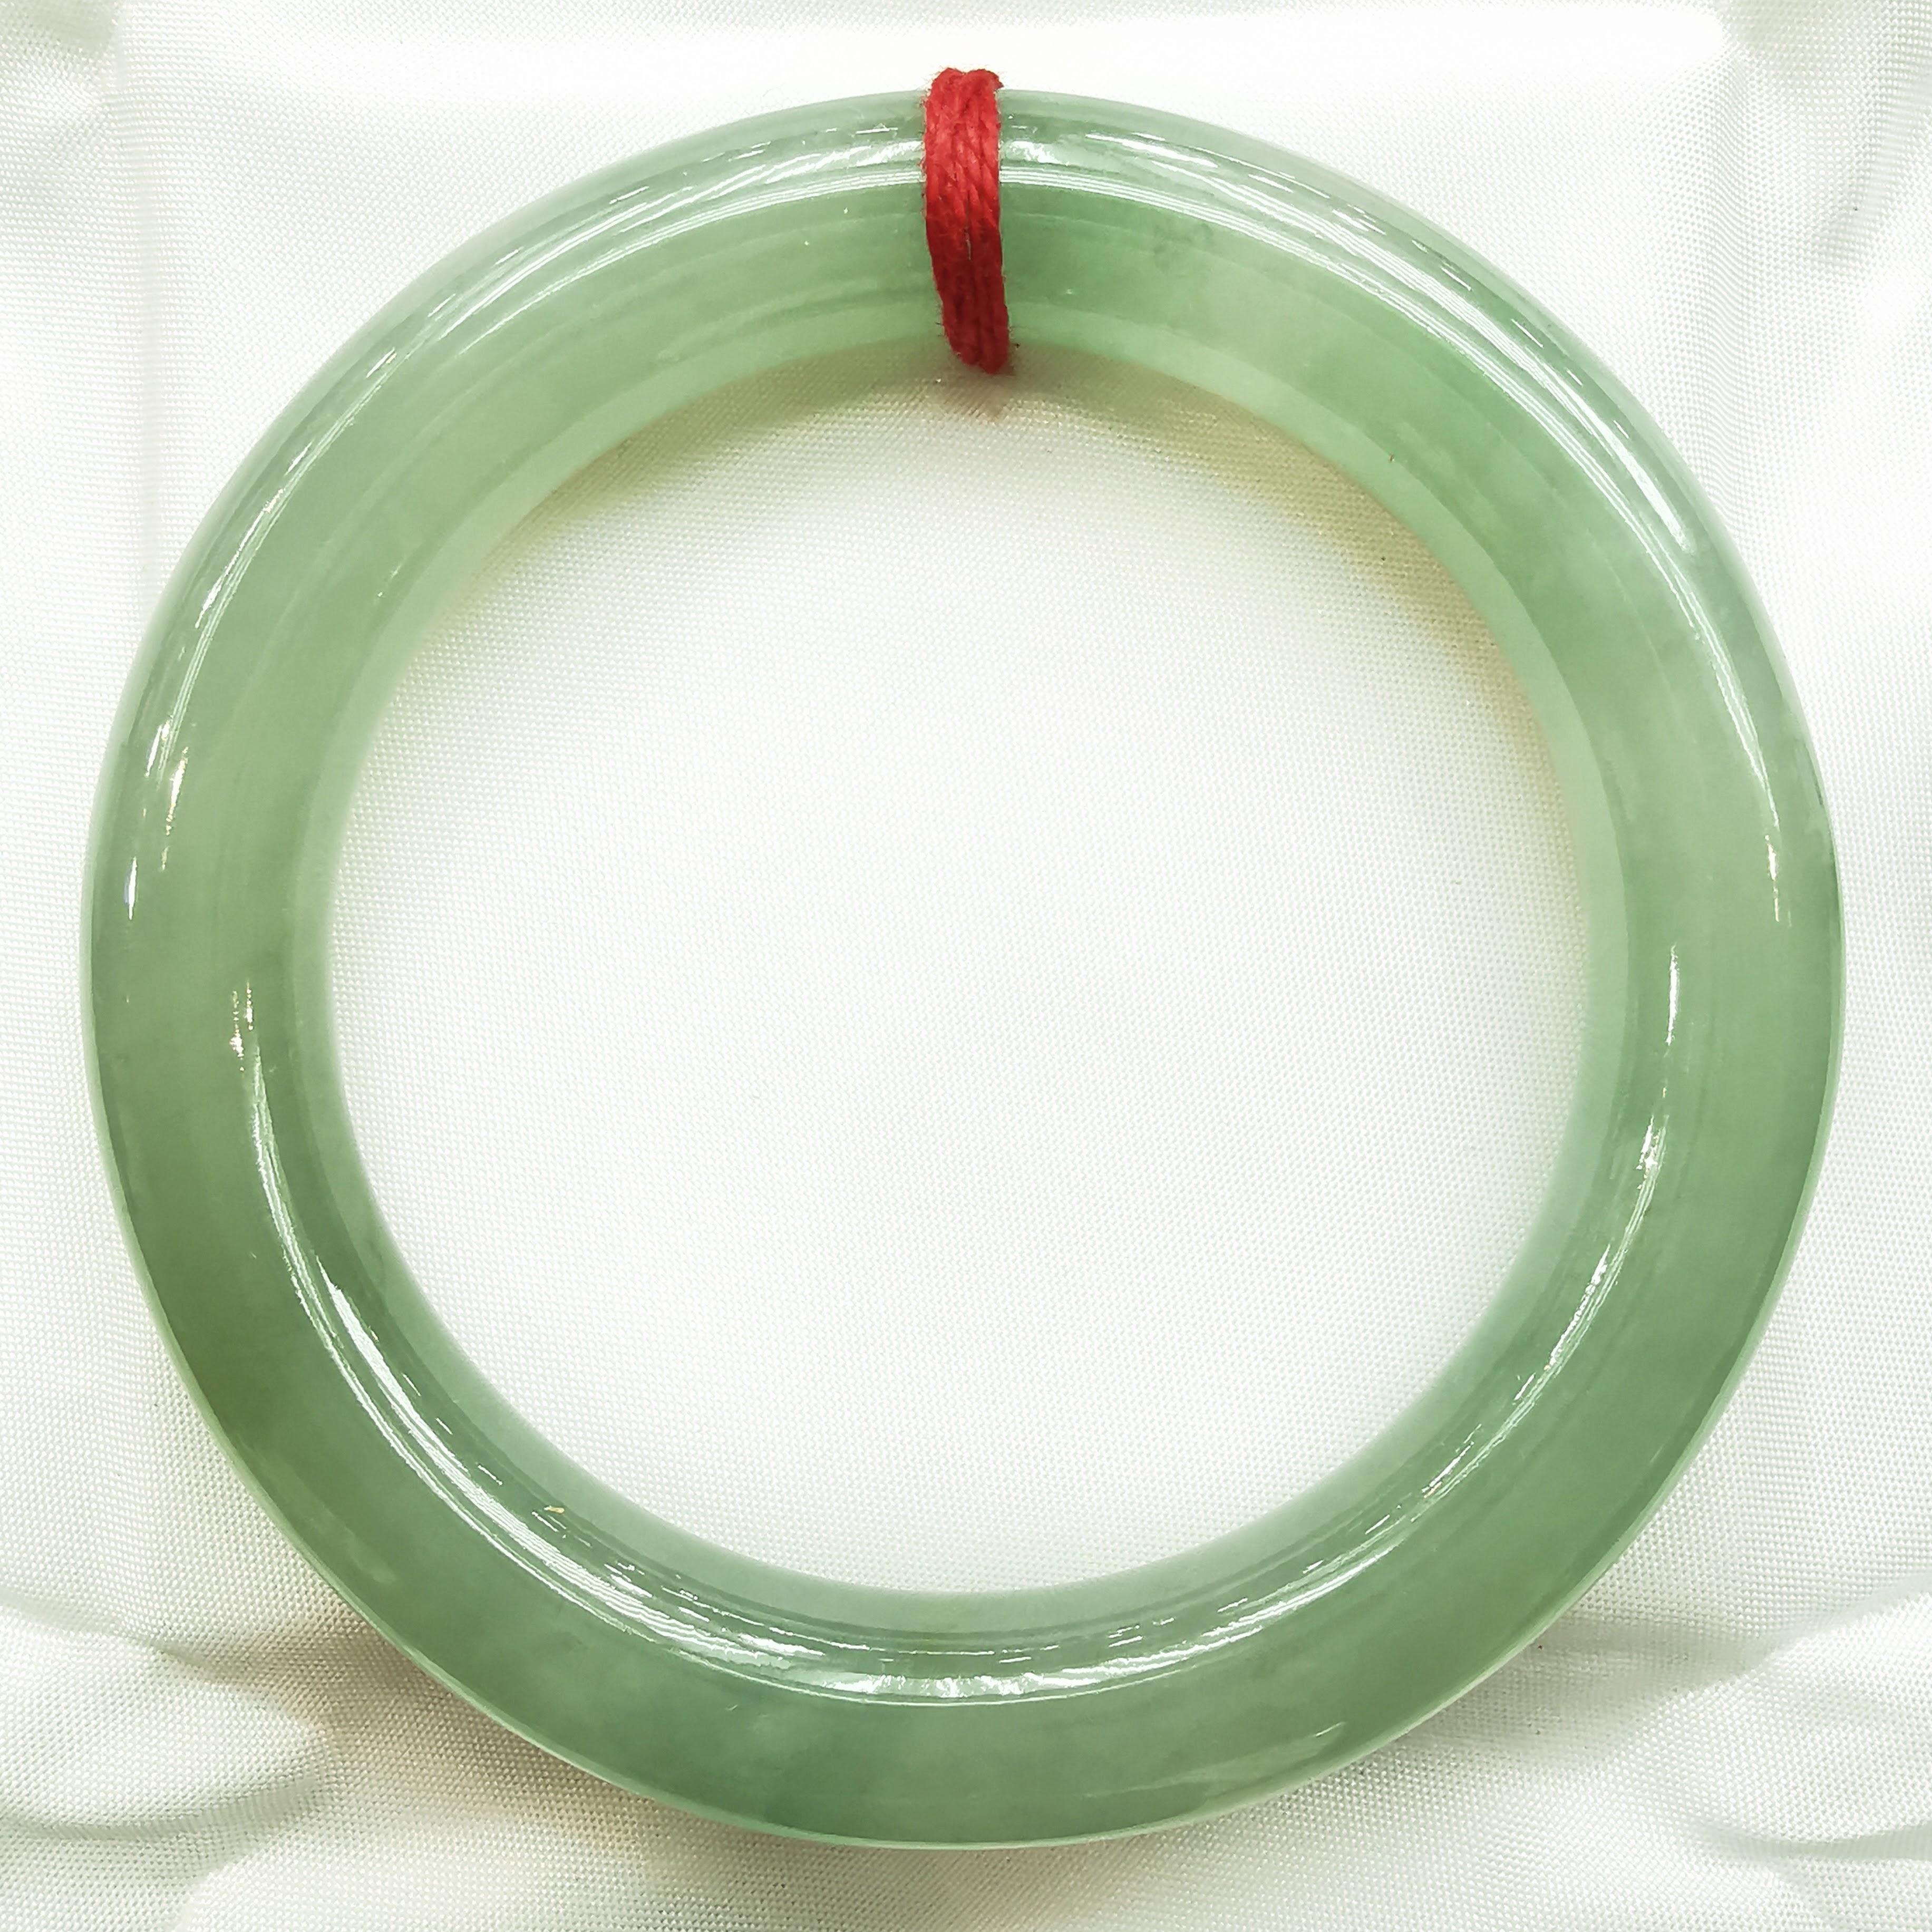 Introducing our Genuine Burmese Light Green Thick Jade Bangle, a stunning piece that exudes natural beauty and elegance. This exquisite bangle is crafted from genuine Burmese jade, known for its exceptional quality and captivating light green